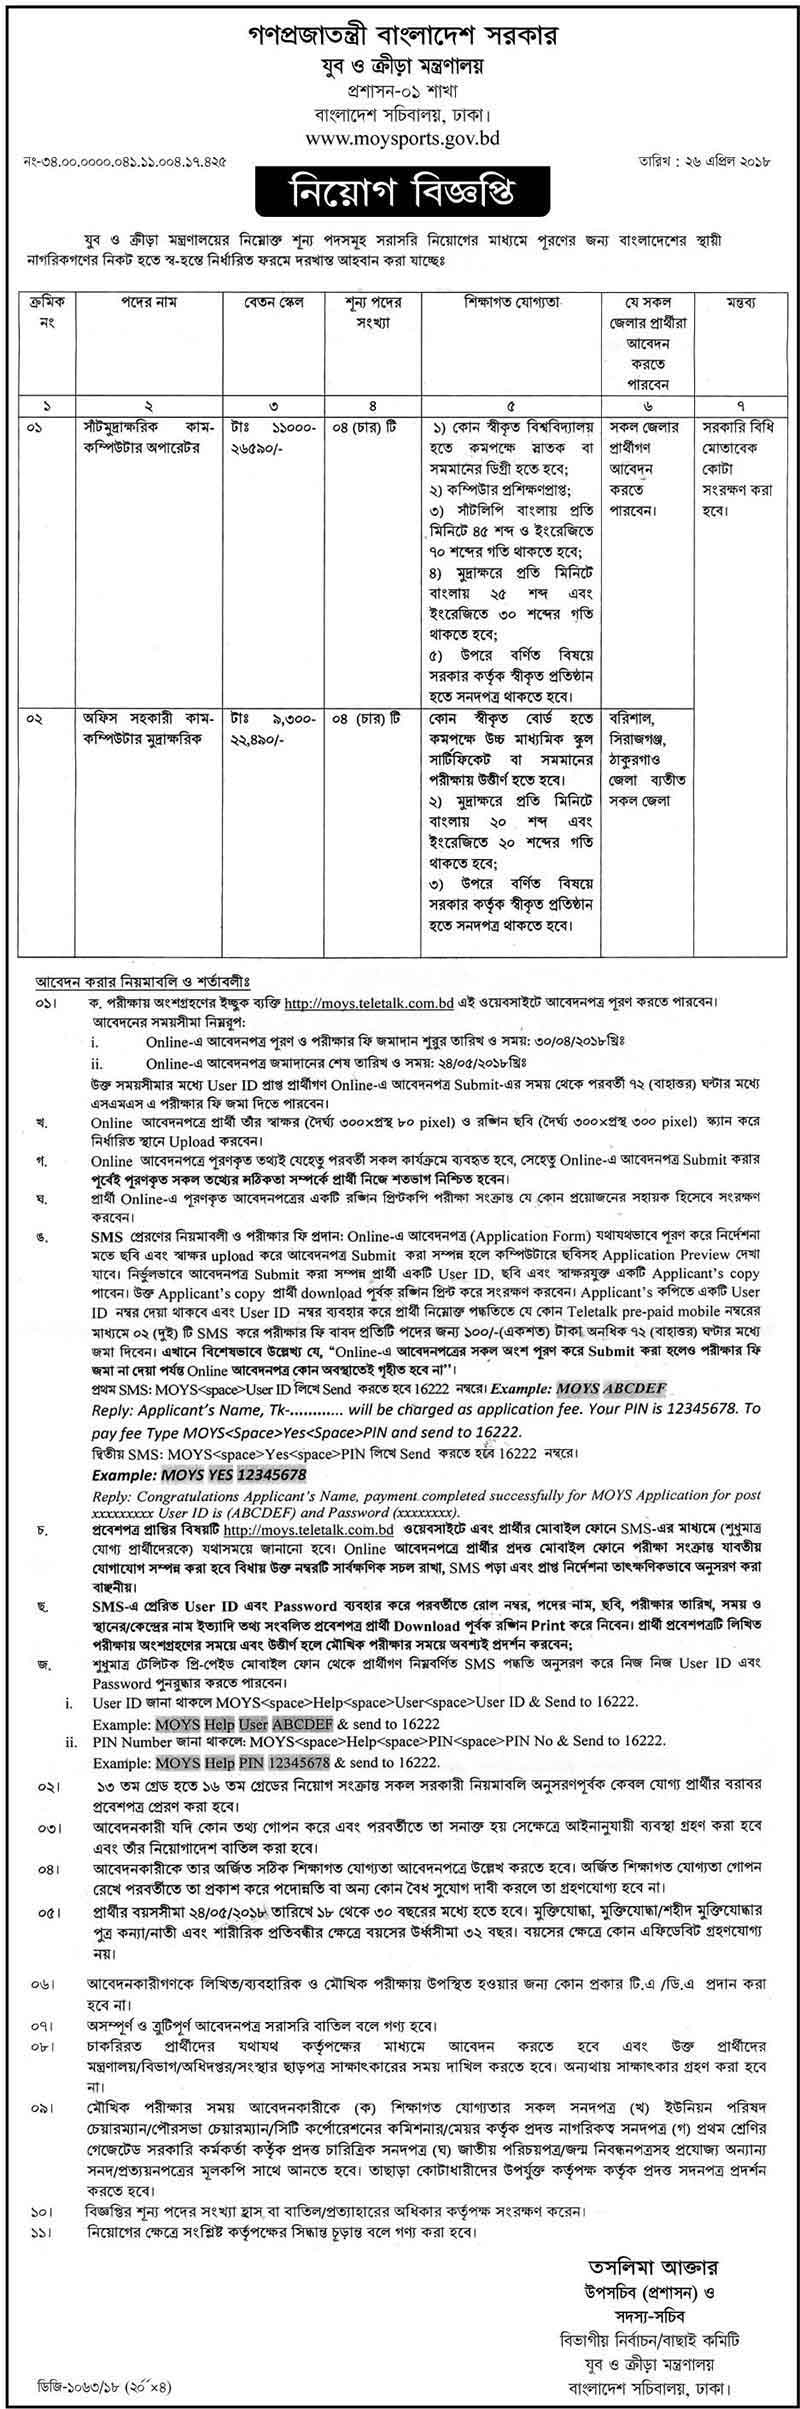 Ministry of Youth and Sports job Circular 